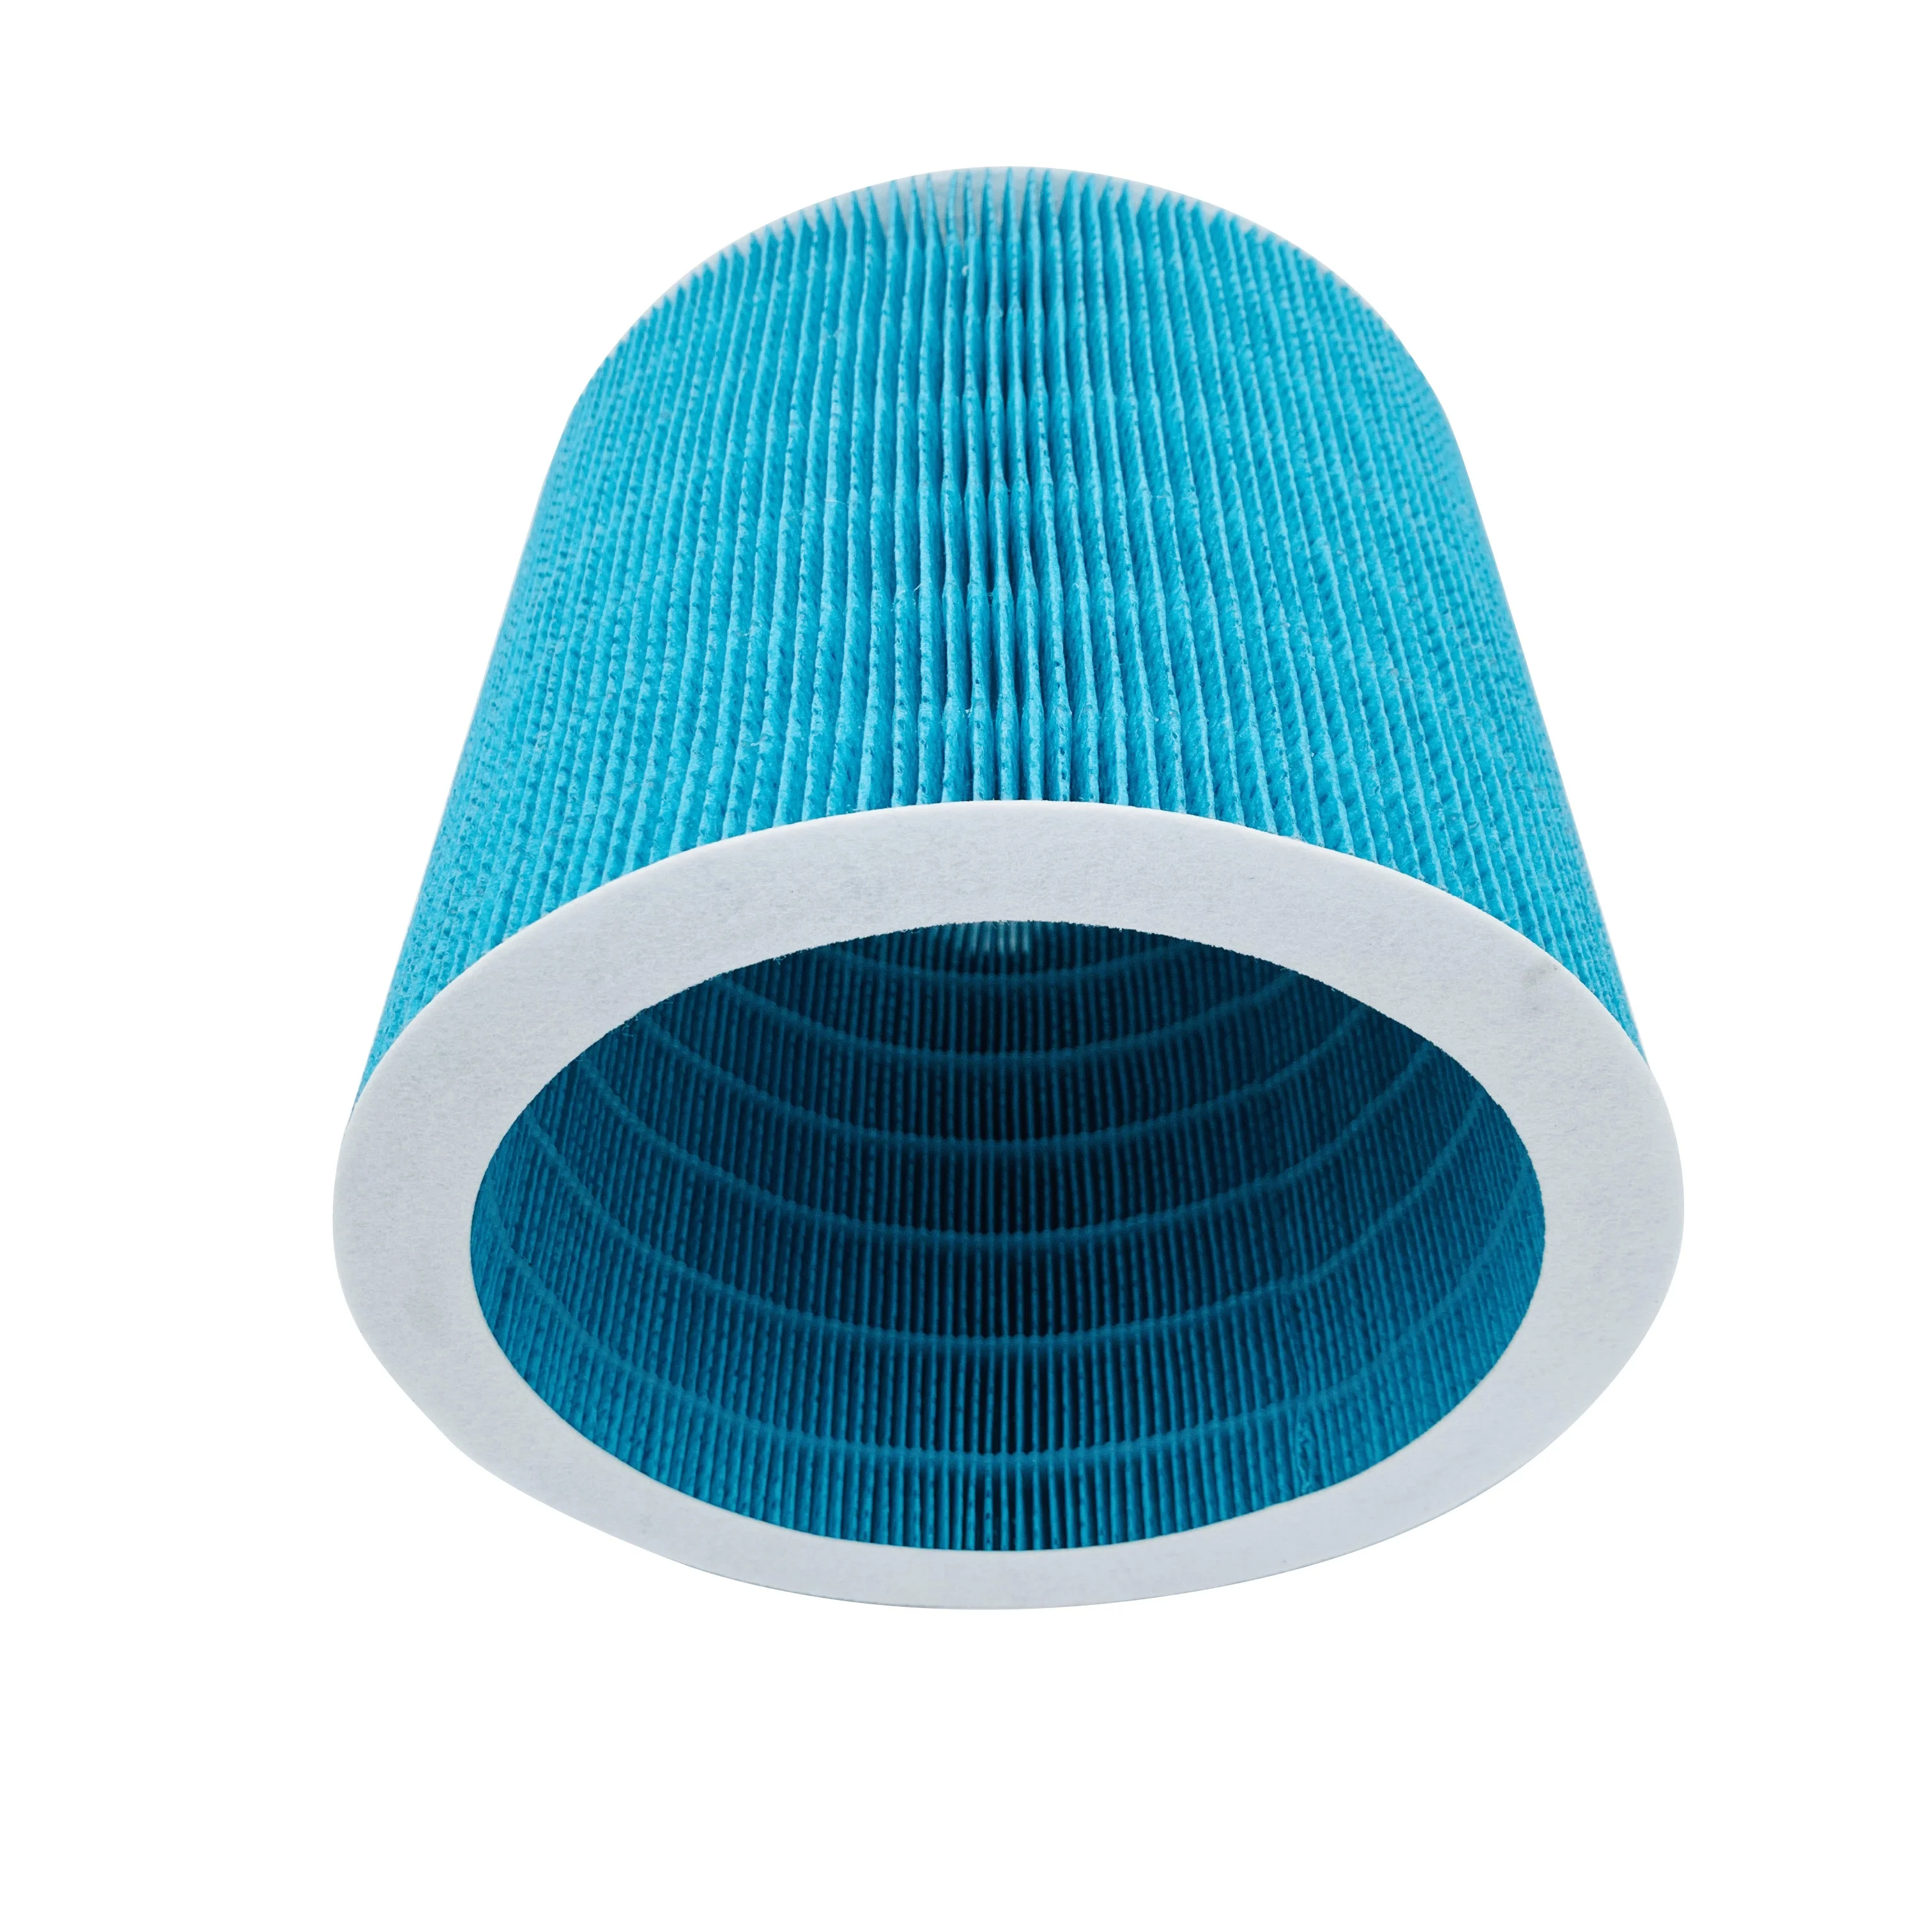 Nonwoven Fabric Evaporative Cooling Pad Replacement Humidifier Wick Filter